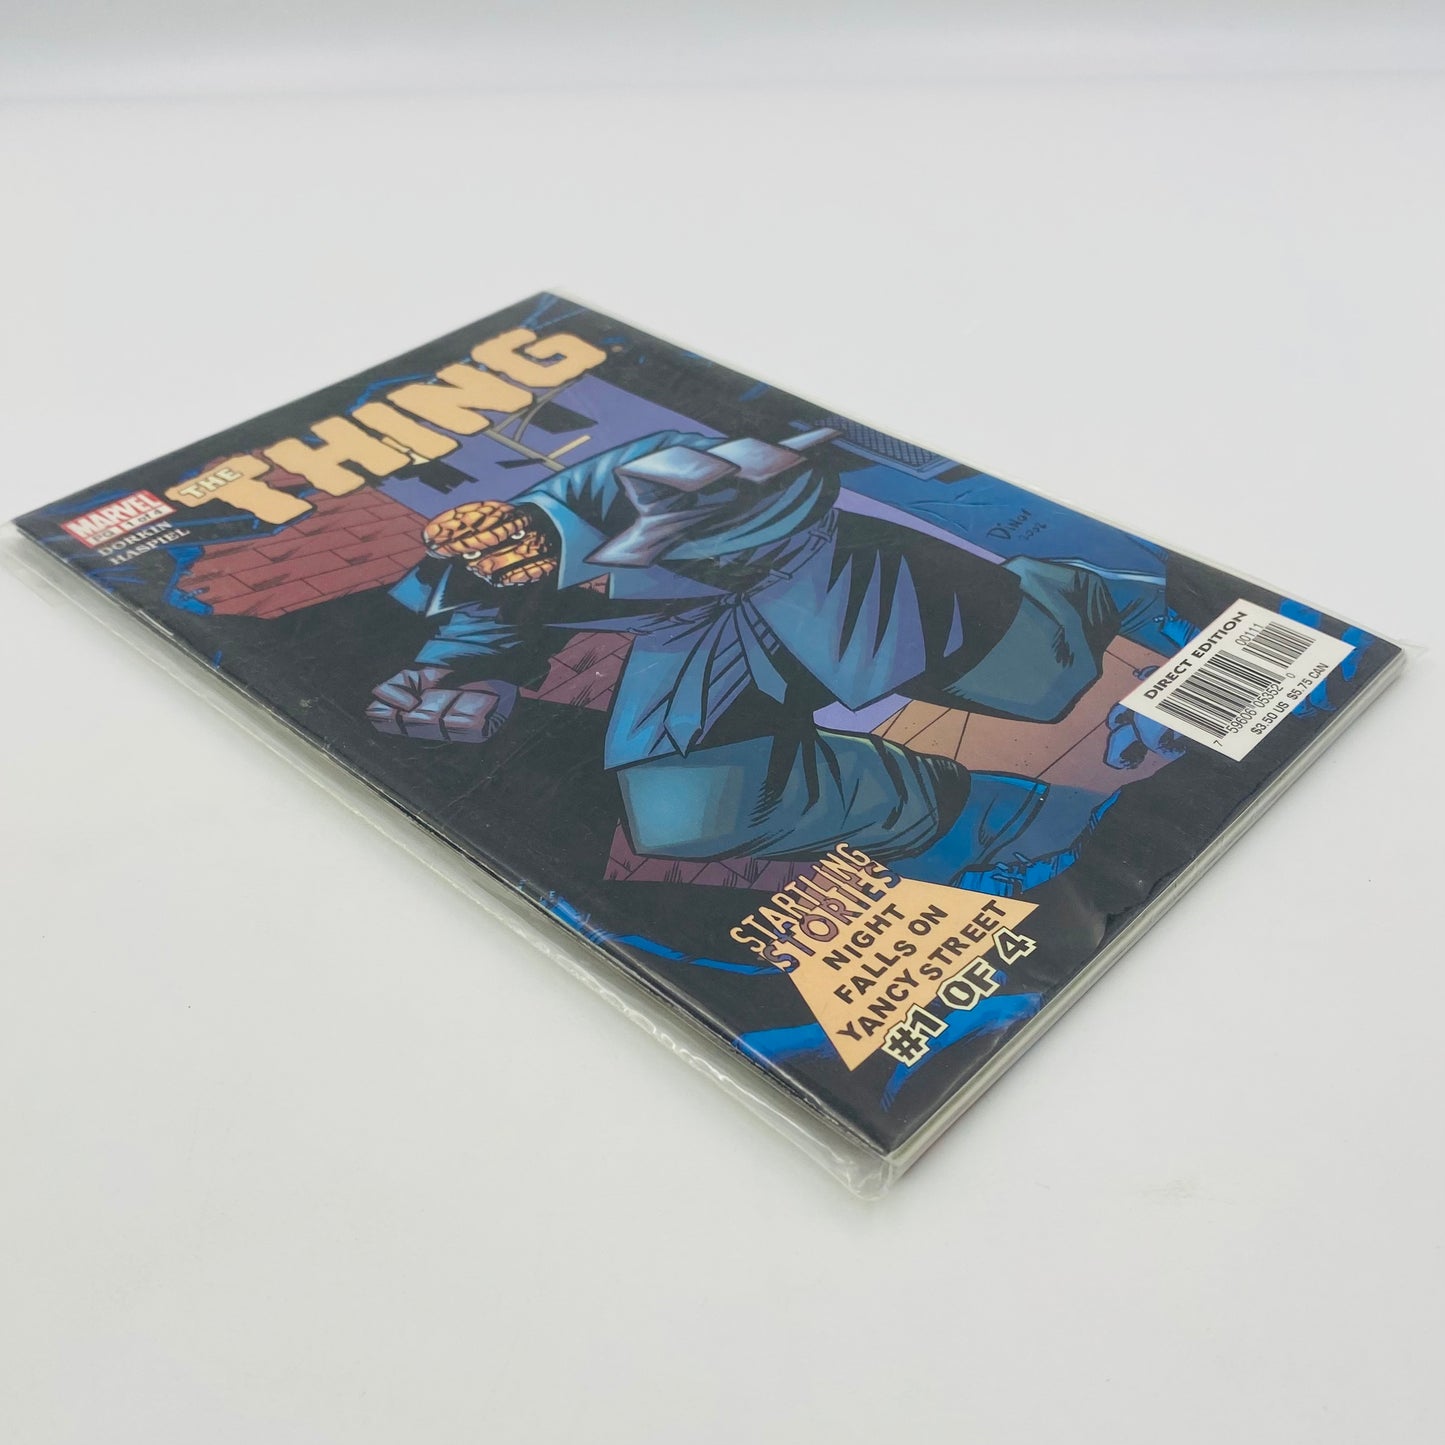 The Thing Night Falls on Yancy Street #1-4 (1997) Marvel Startling Stories